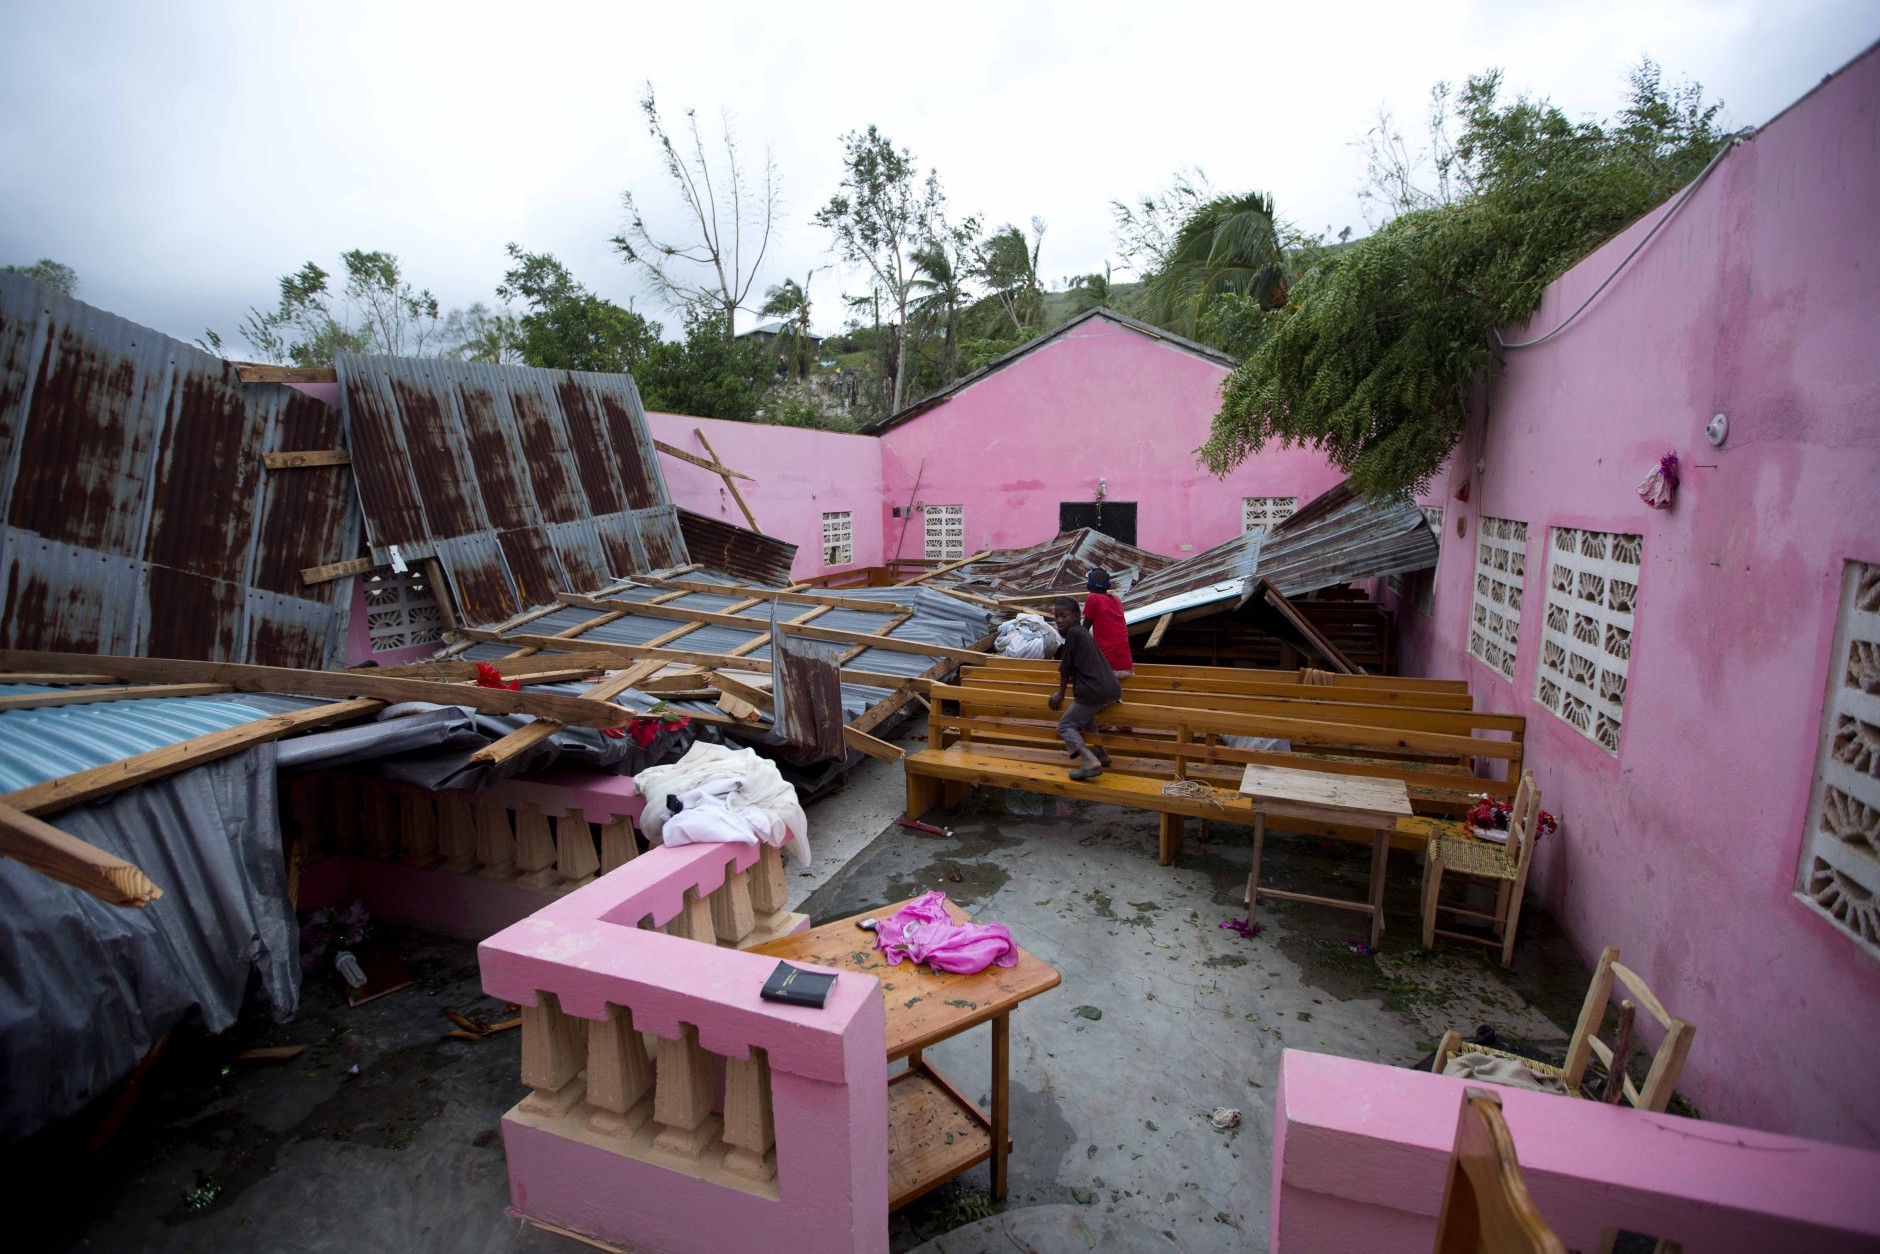 Children sit inside a church damaged by Hurricane Matthew, in Saint-Louis, Haiti, Wednesday, Oct. 5, 2016. Rescue workers in Haiti struggled to reach cutoff towns and learn the full extent of the death and destruction caused by Hurricane Matthew as the storm began battering the Bahamas on Wednesday and triggered large-scale evacuations along the U.S. East Coast. ( AP Photo/Dieu Nalio Chery)